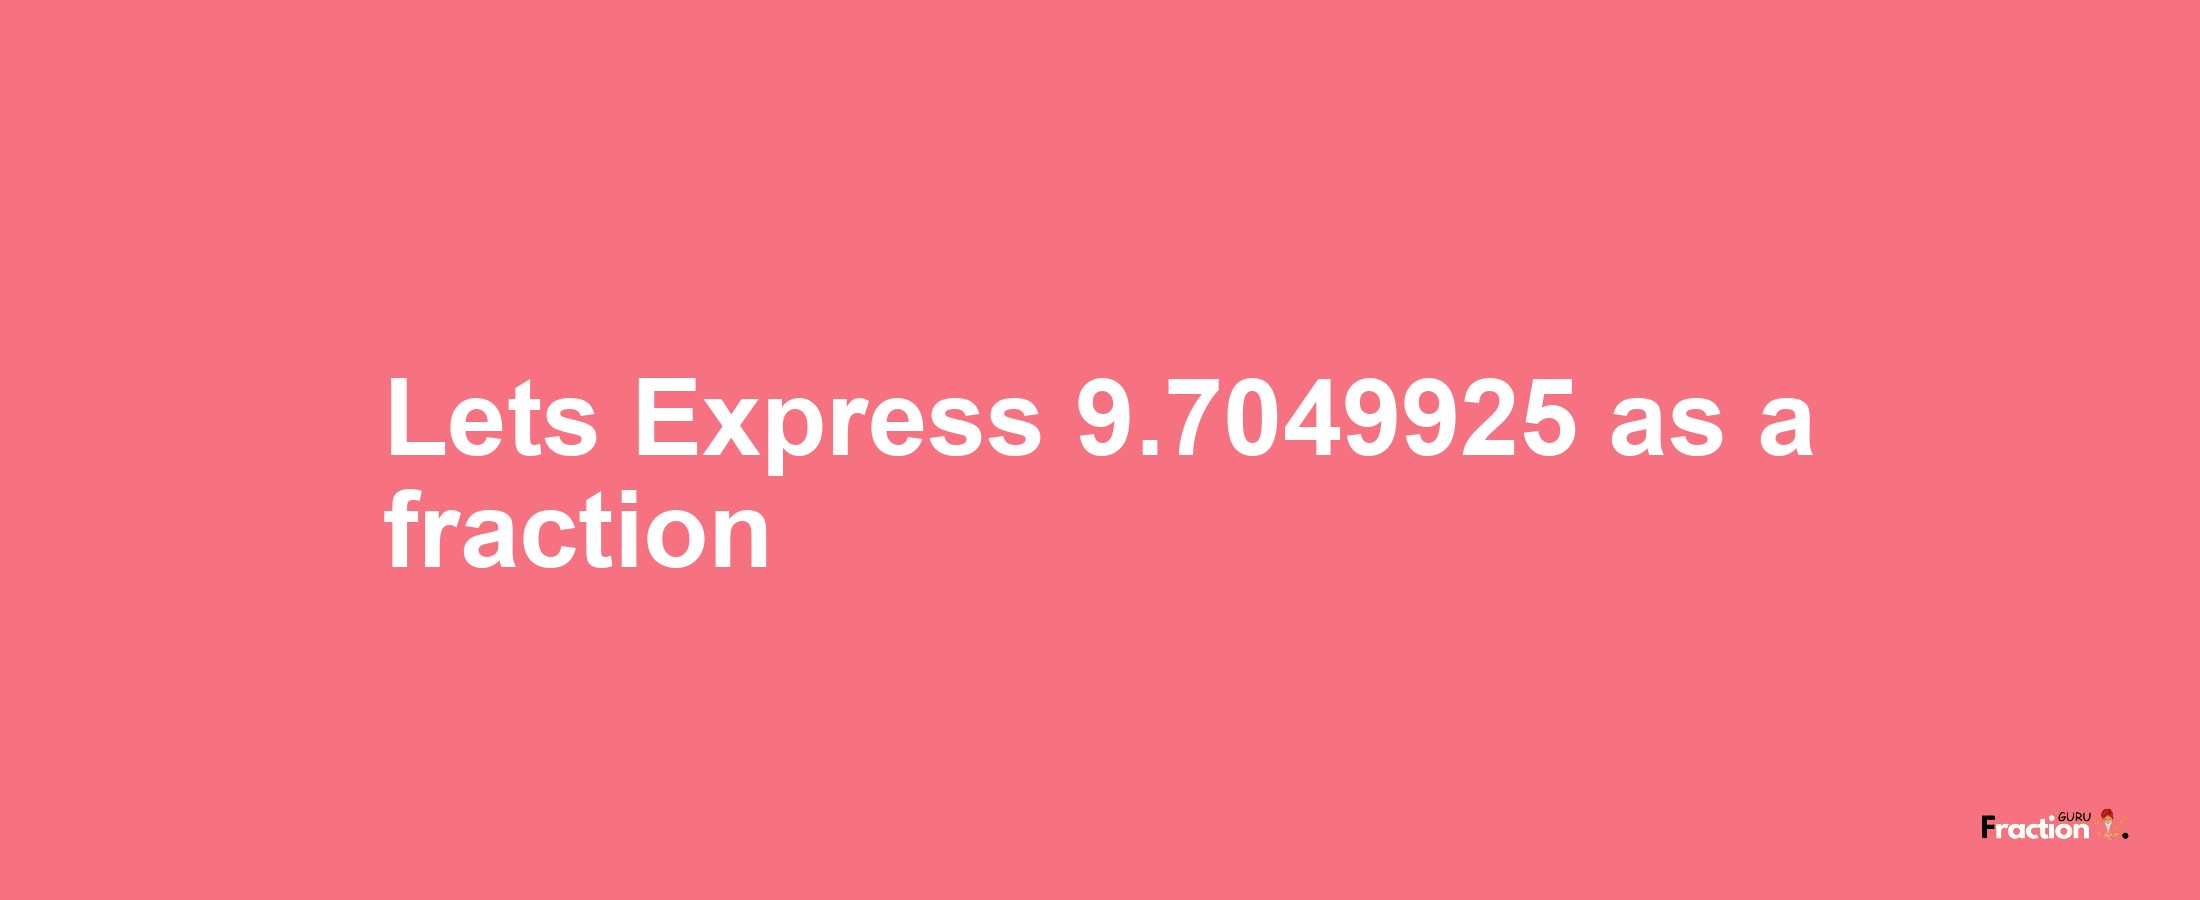 Lets Express 9.7049925 as afraction